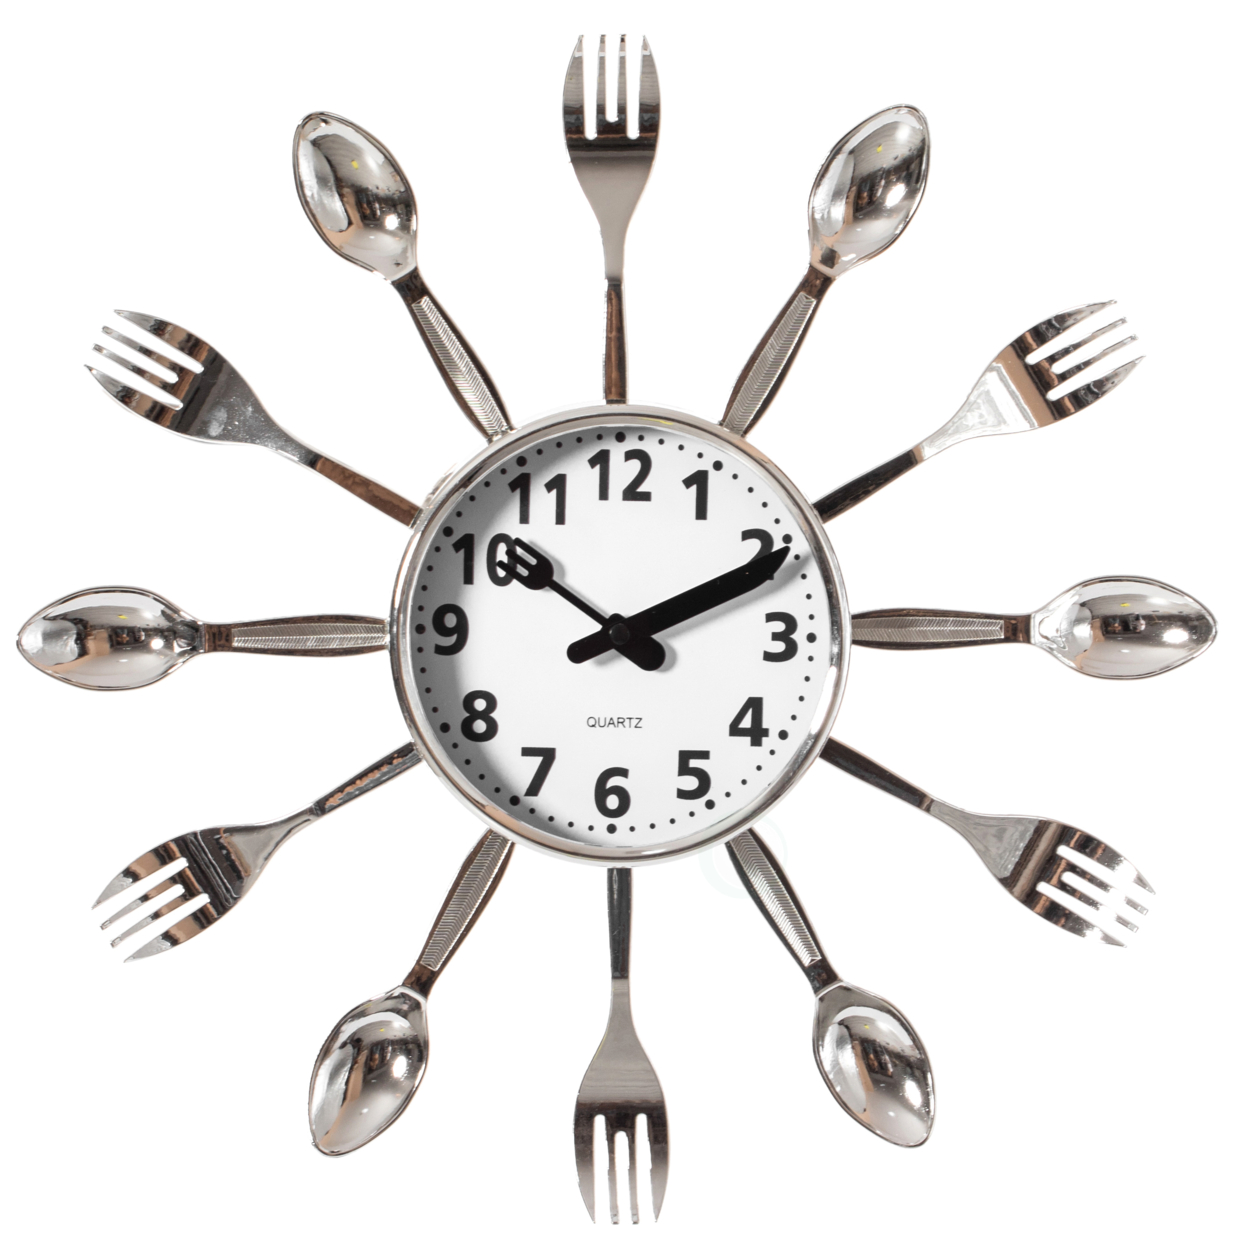 Decorative 3D Cutlery Utensil Spoon And Fork Wall Clock For Kitchen, Playroom Or Bedroom - Silver